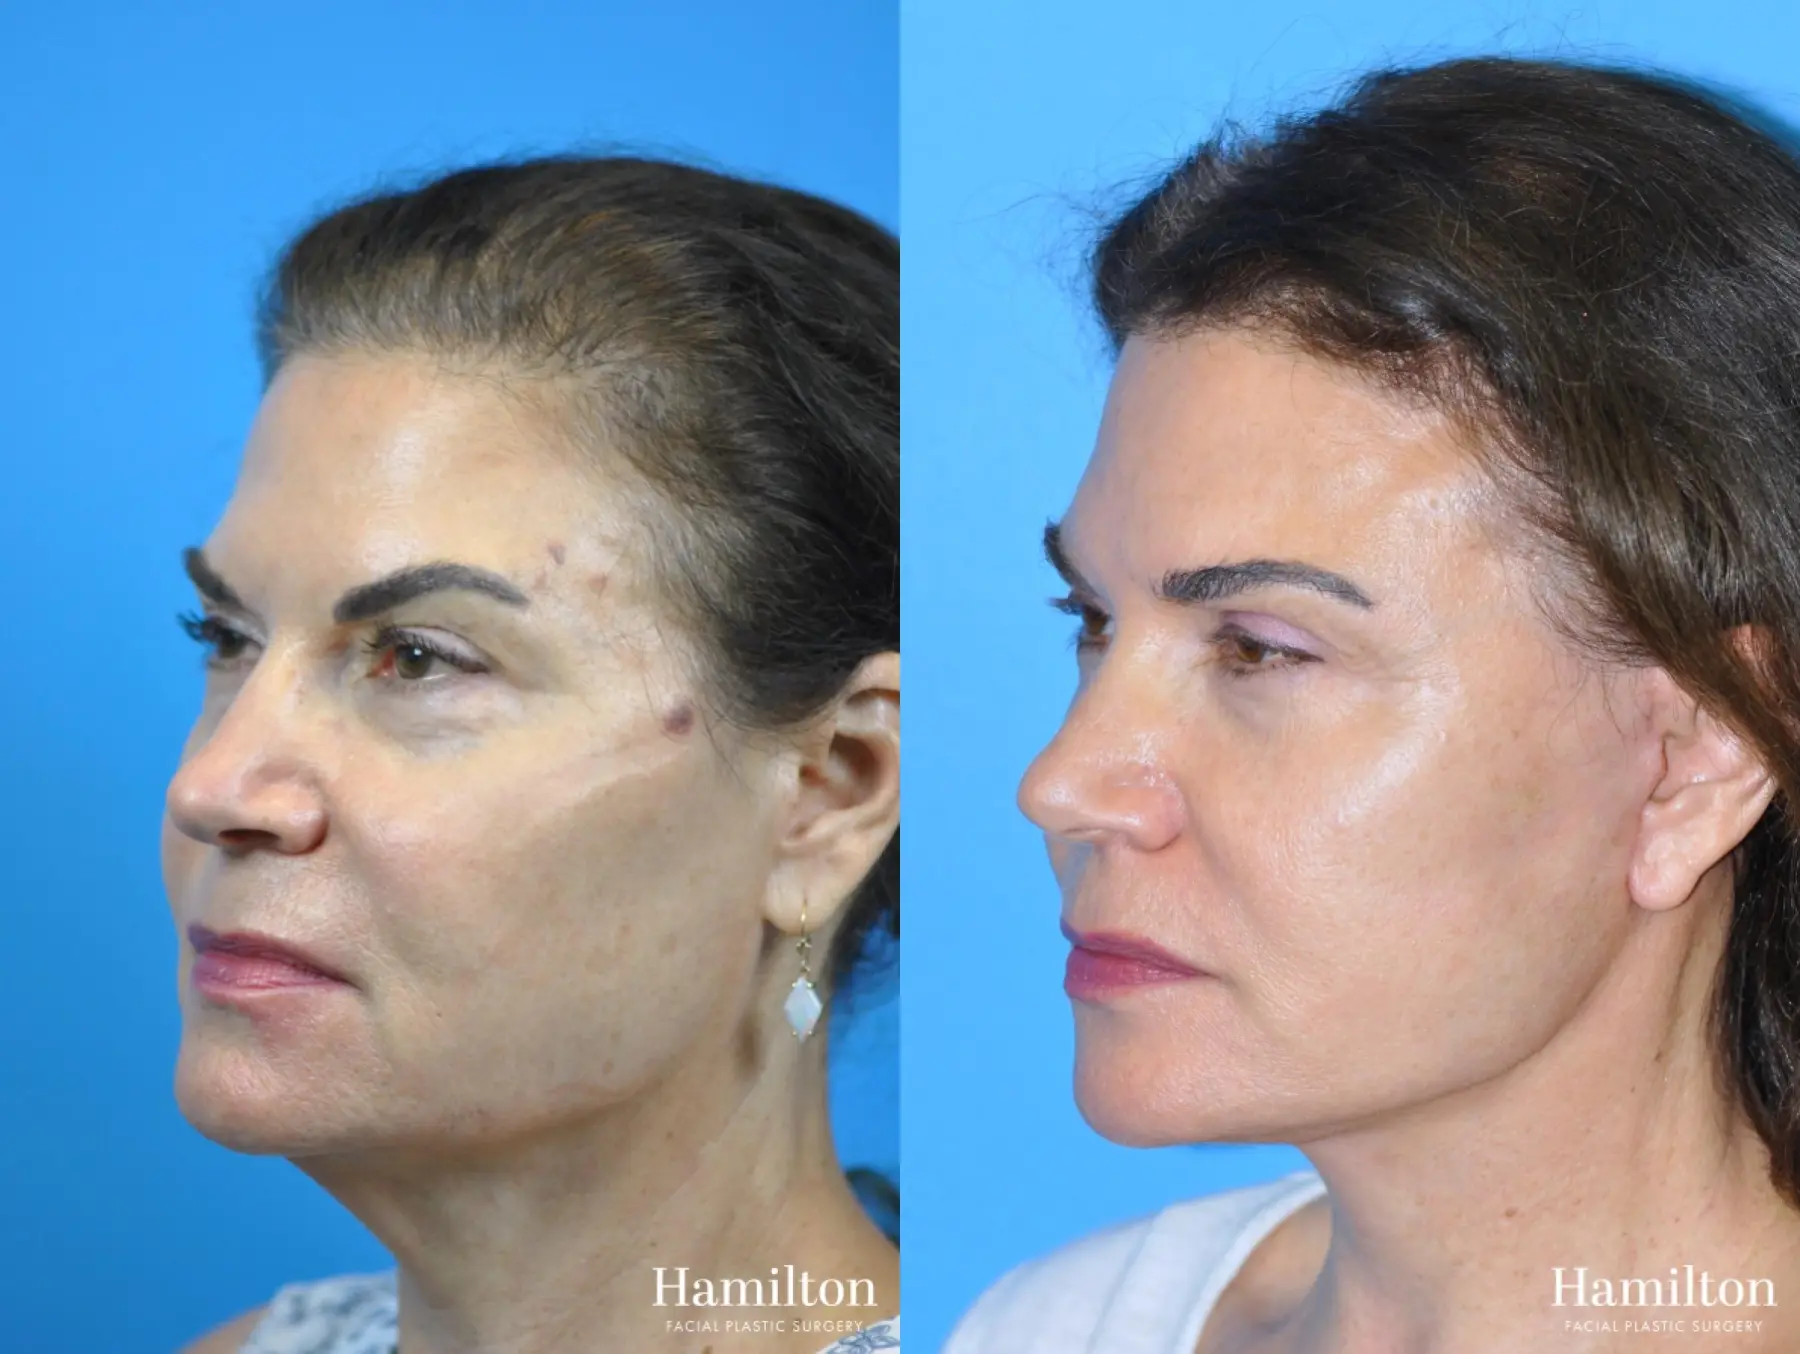 Facelift: Patient 2 - Before and After 3